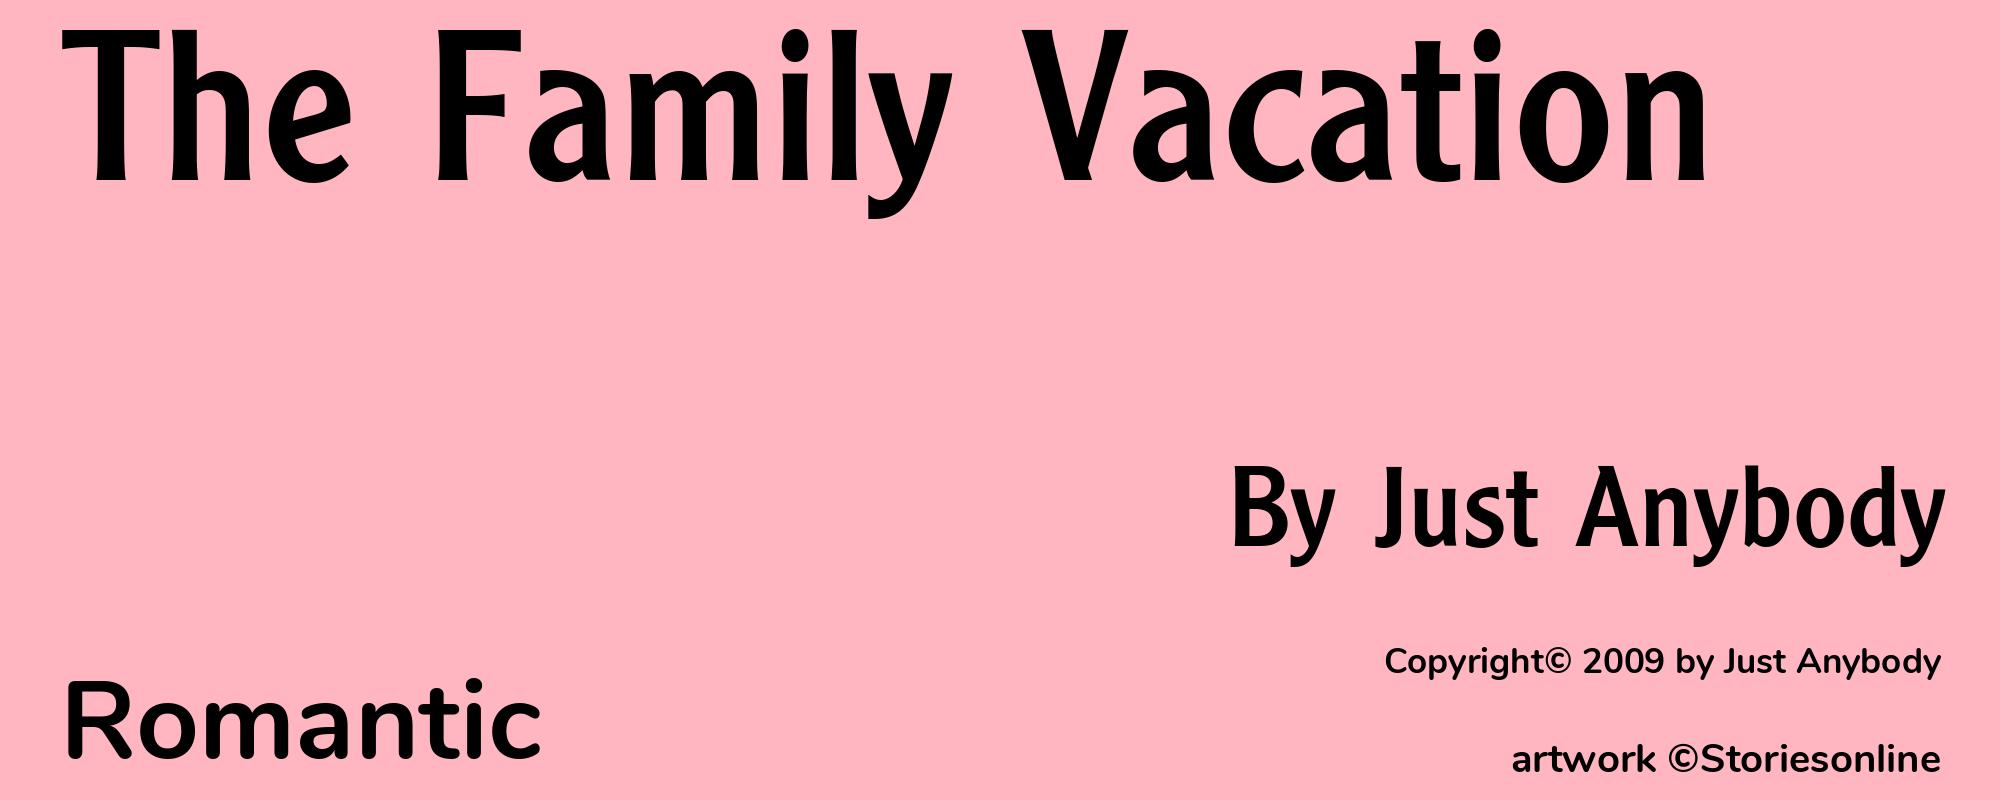 The Family Vacation - Cover